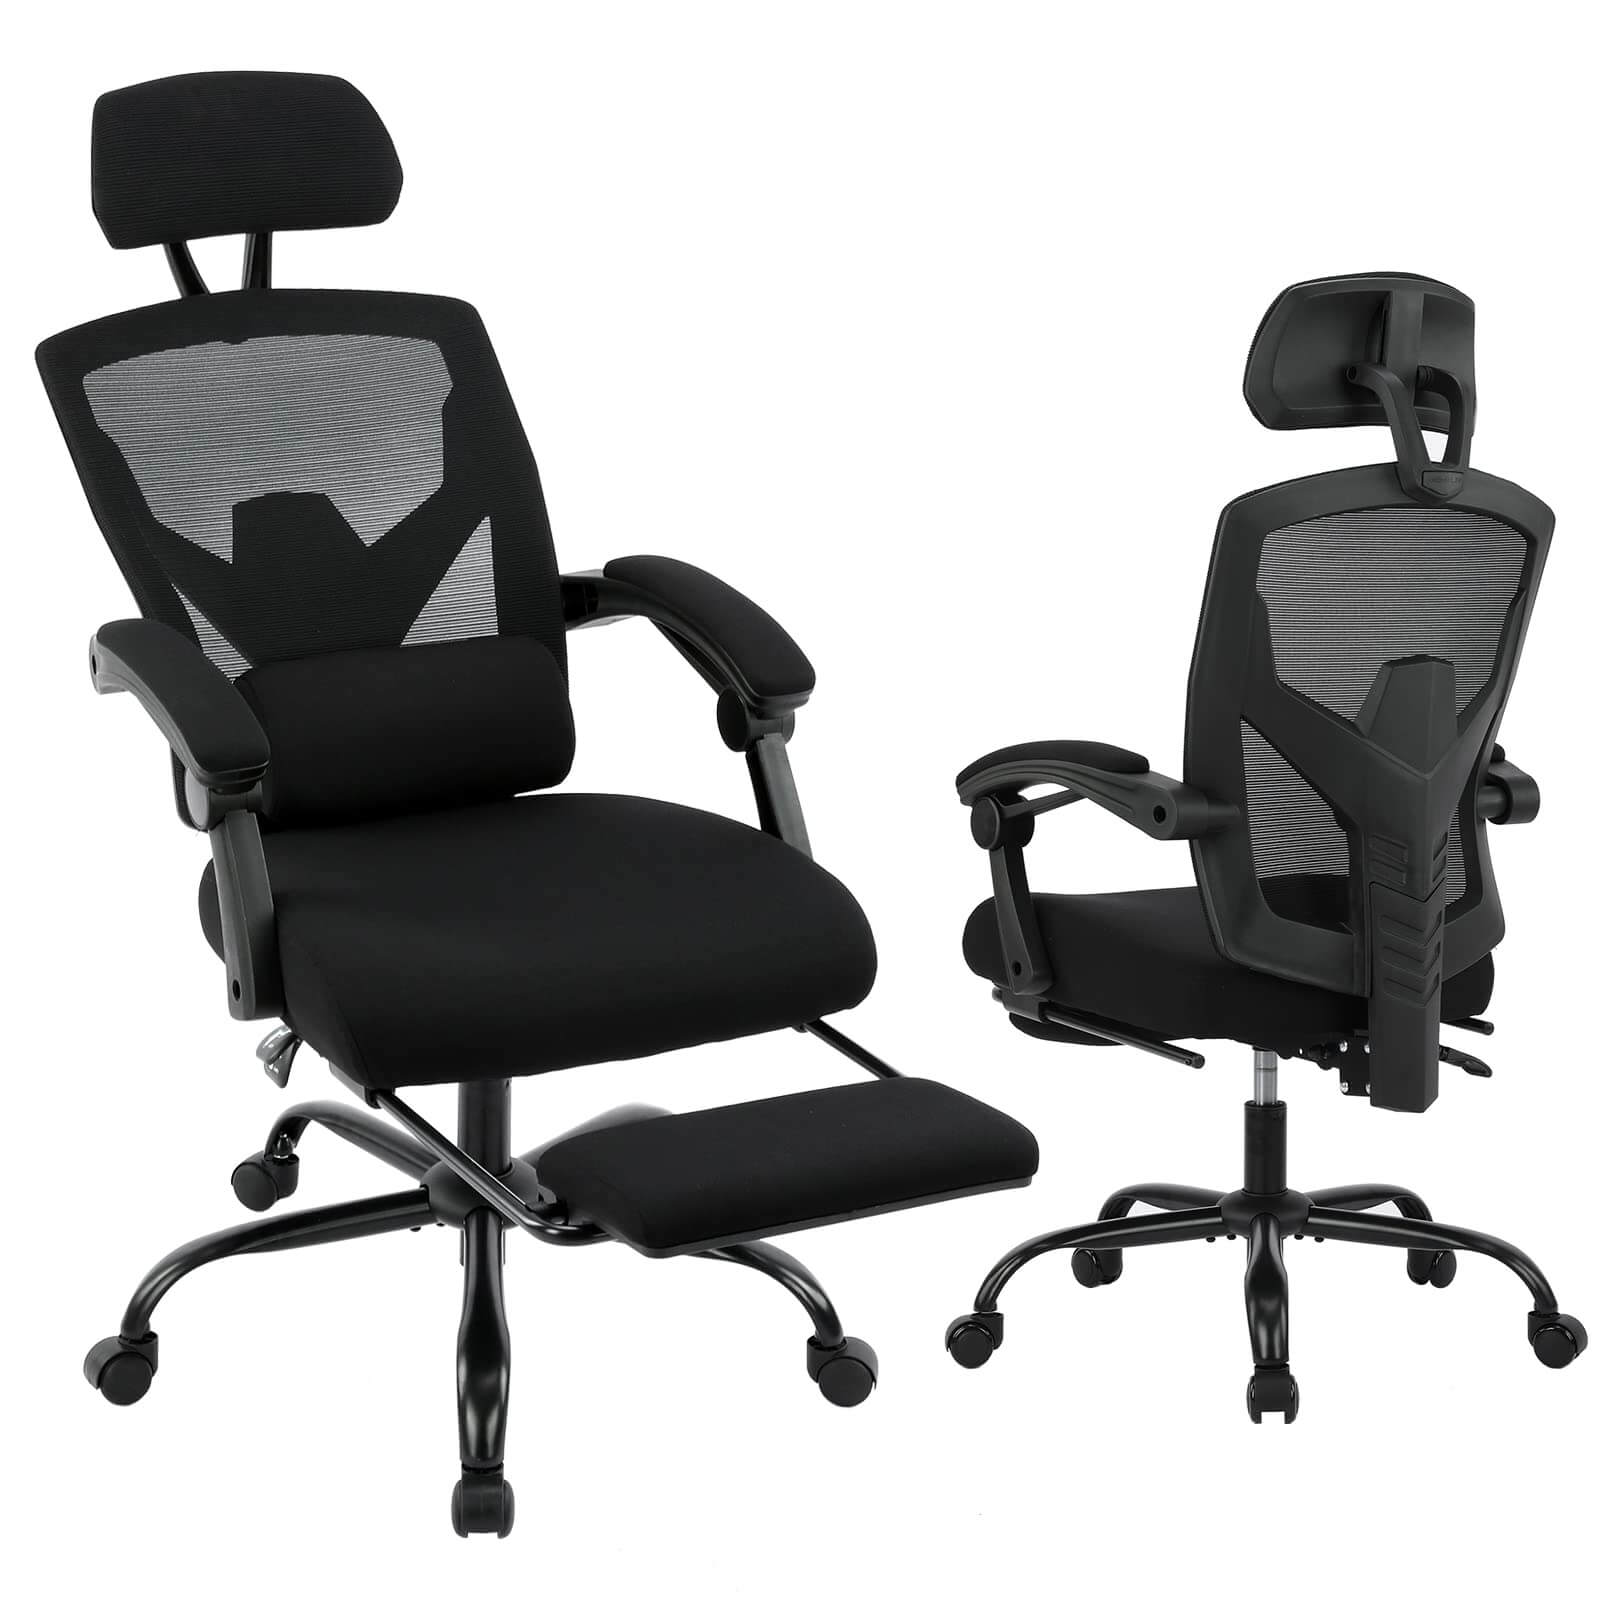 Qulomvs Mesh Ergonomic Office Task Chair with Footrest, Headrest and  Backrest 90-135 Adjustable Computer Executive Home Desk Chair with Wheels  360 Swivel